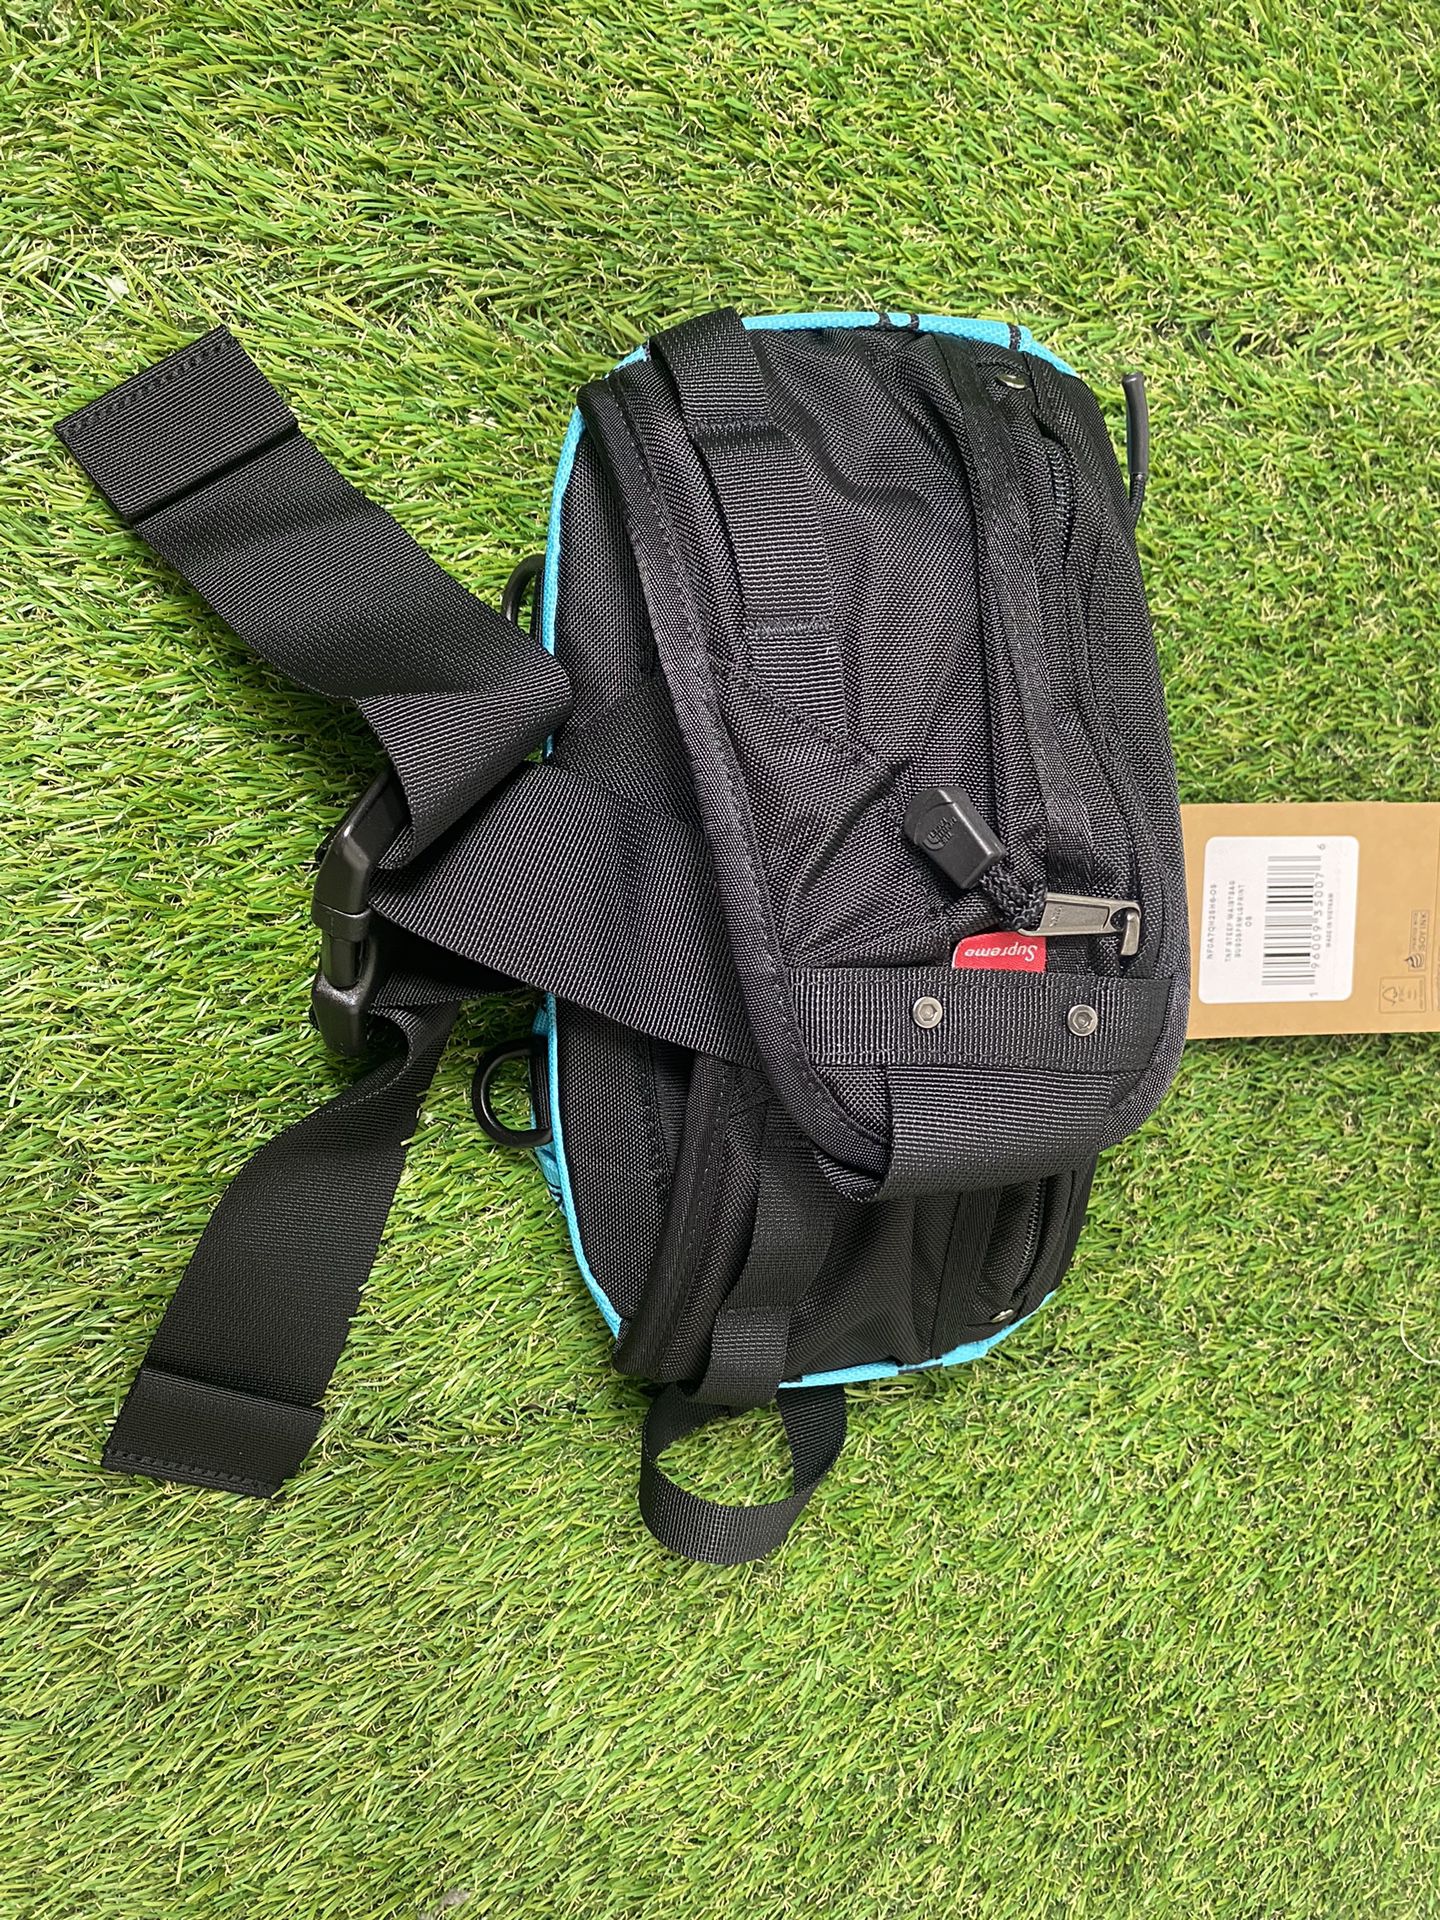 NEW Supreme The North Face Steep Tech Waist Bag Teal Rare Color